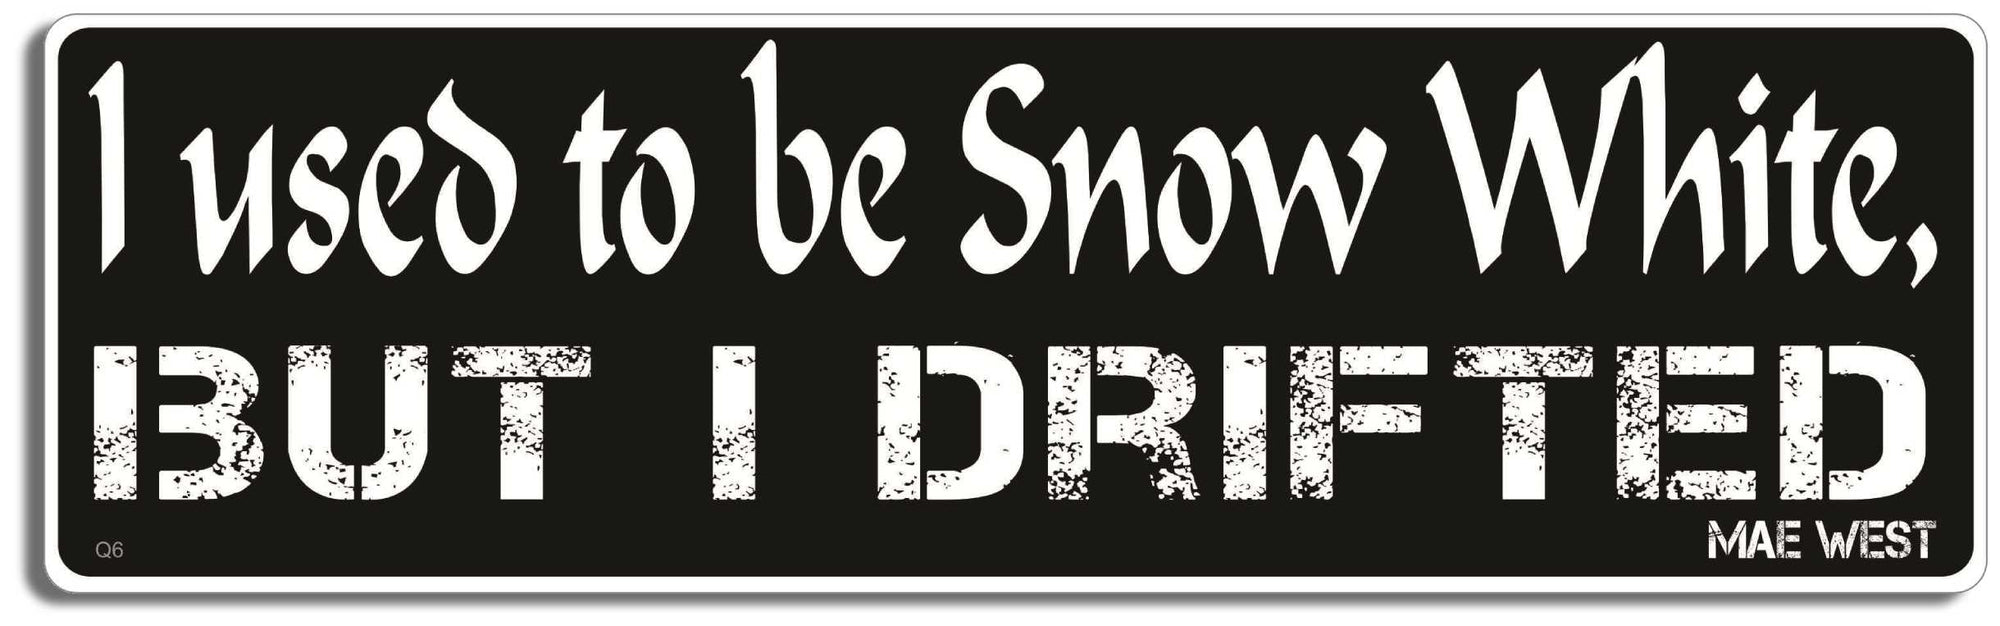 I used to be Snow White, but I drifted - Mae West - 3" x 10" Bumper Sticker--Car Magnet- -  Decal Bumper Sticker-quotation Bumper Sticker Car Magnet I used to be Snow White, but I drifted-  Decal for carsquotation, quote